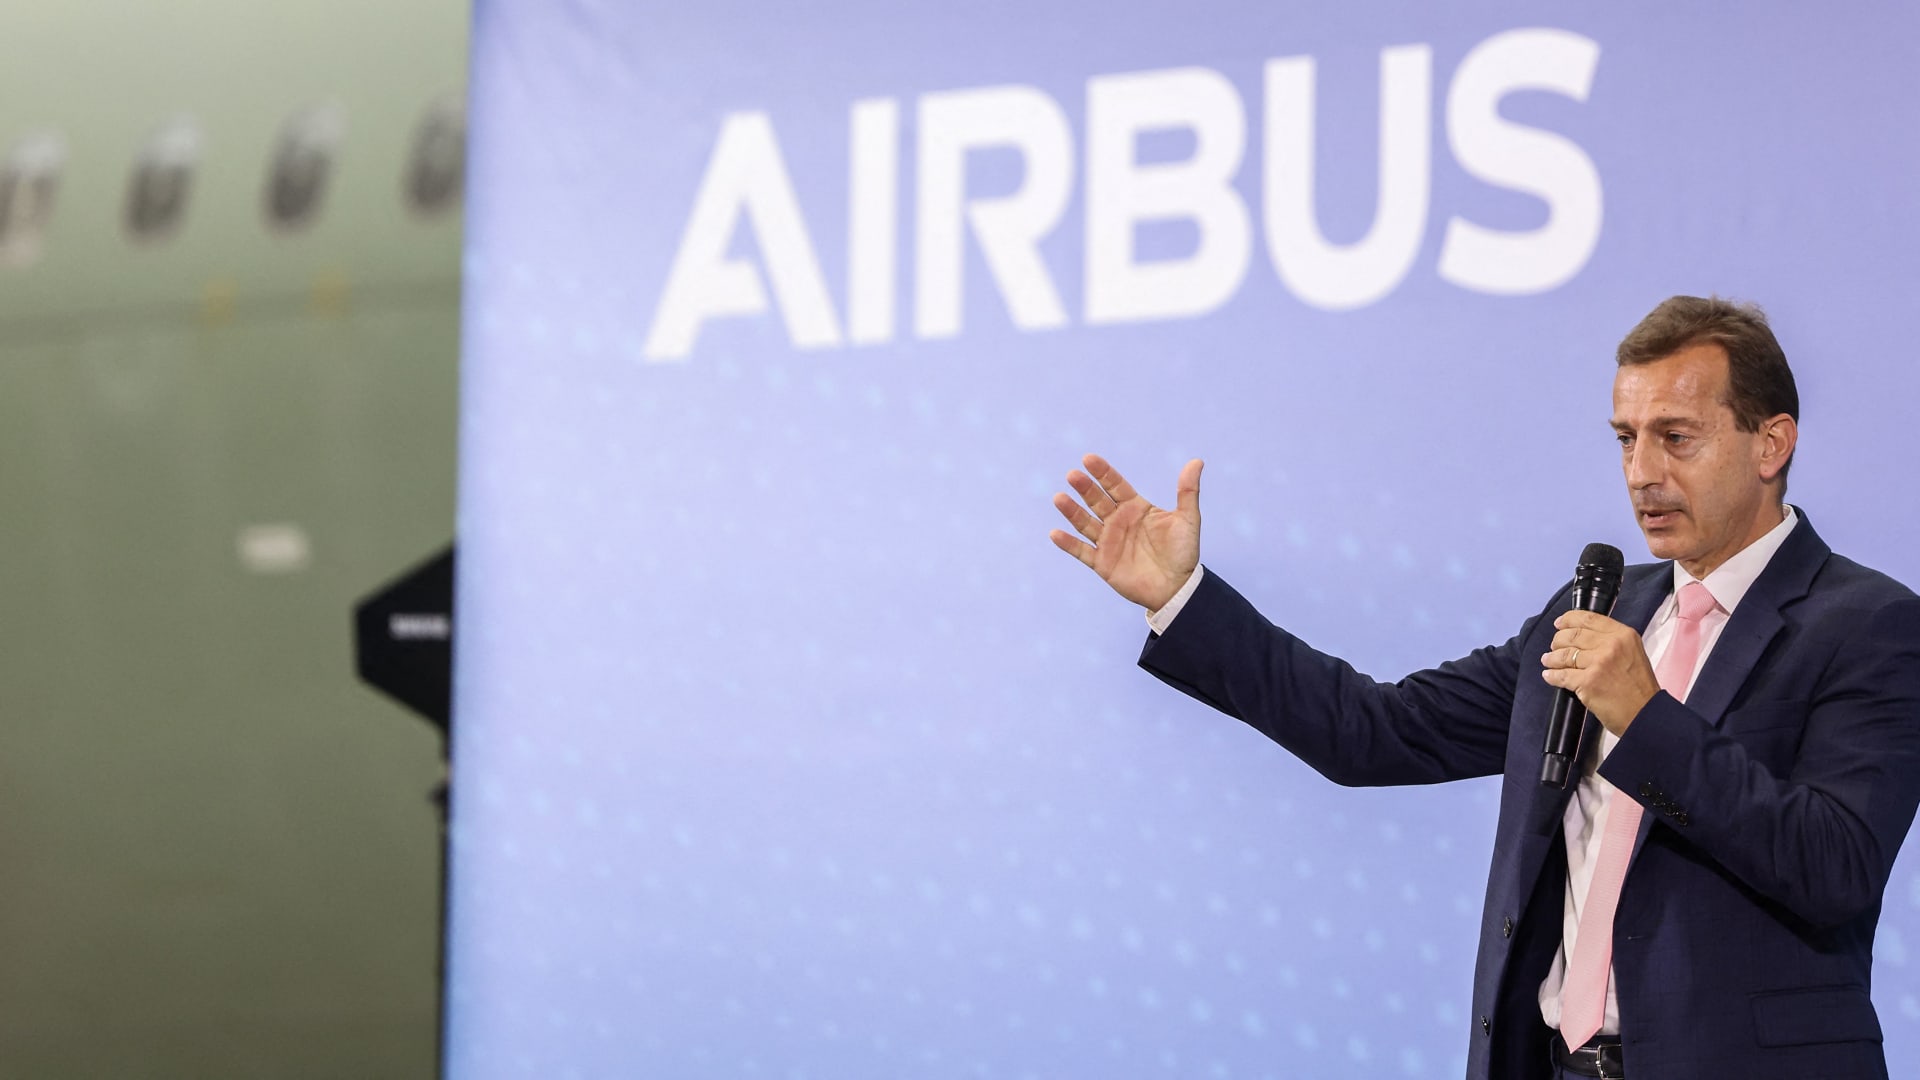 Airbus CEO says Europe is failing to work together on defense despite ‘new threats’